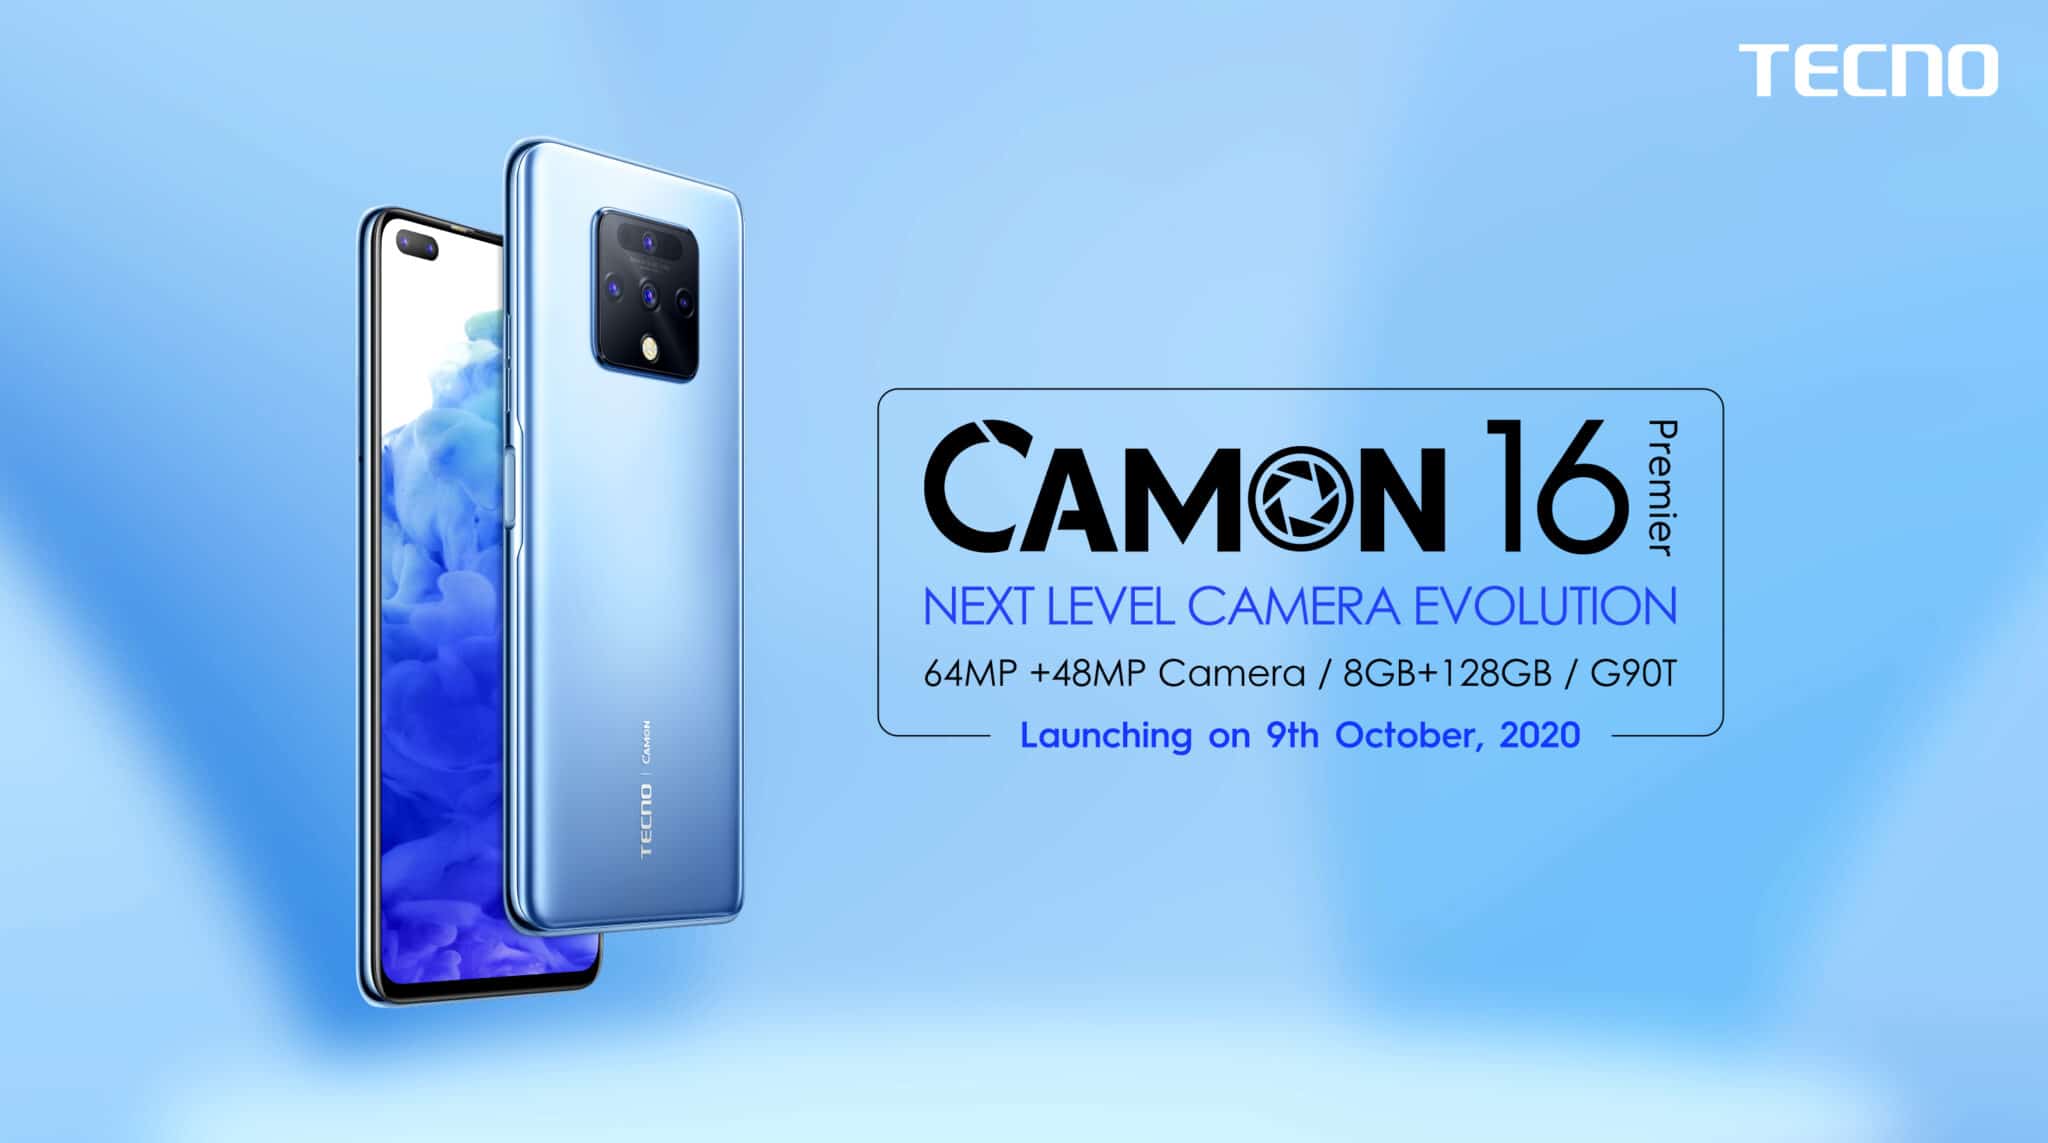 Tecno to Launch Camon 16 Premier on 9th October